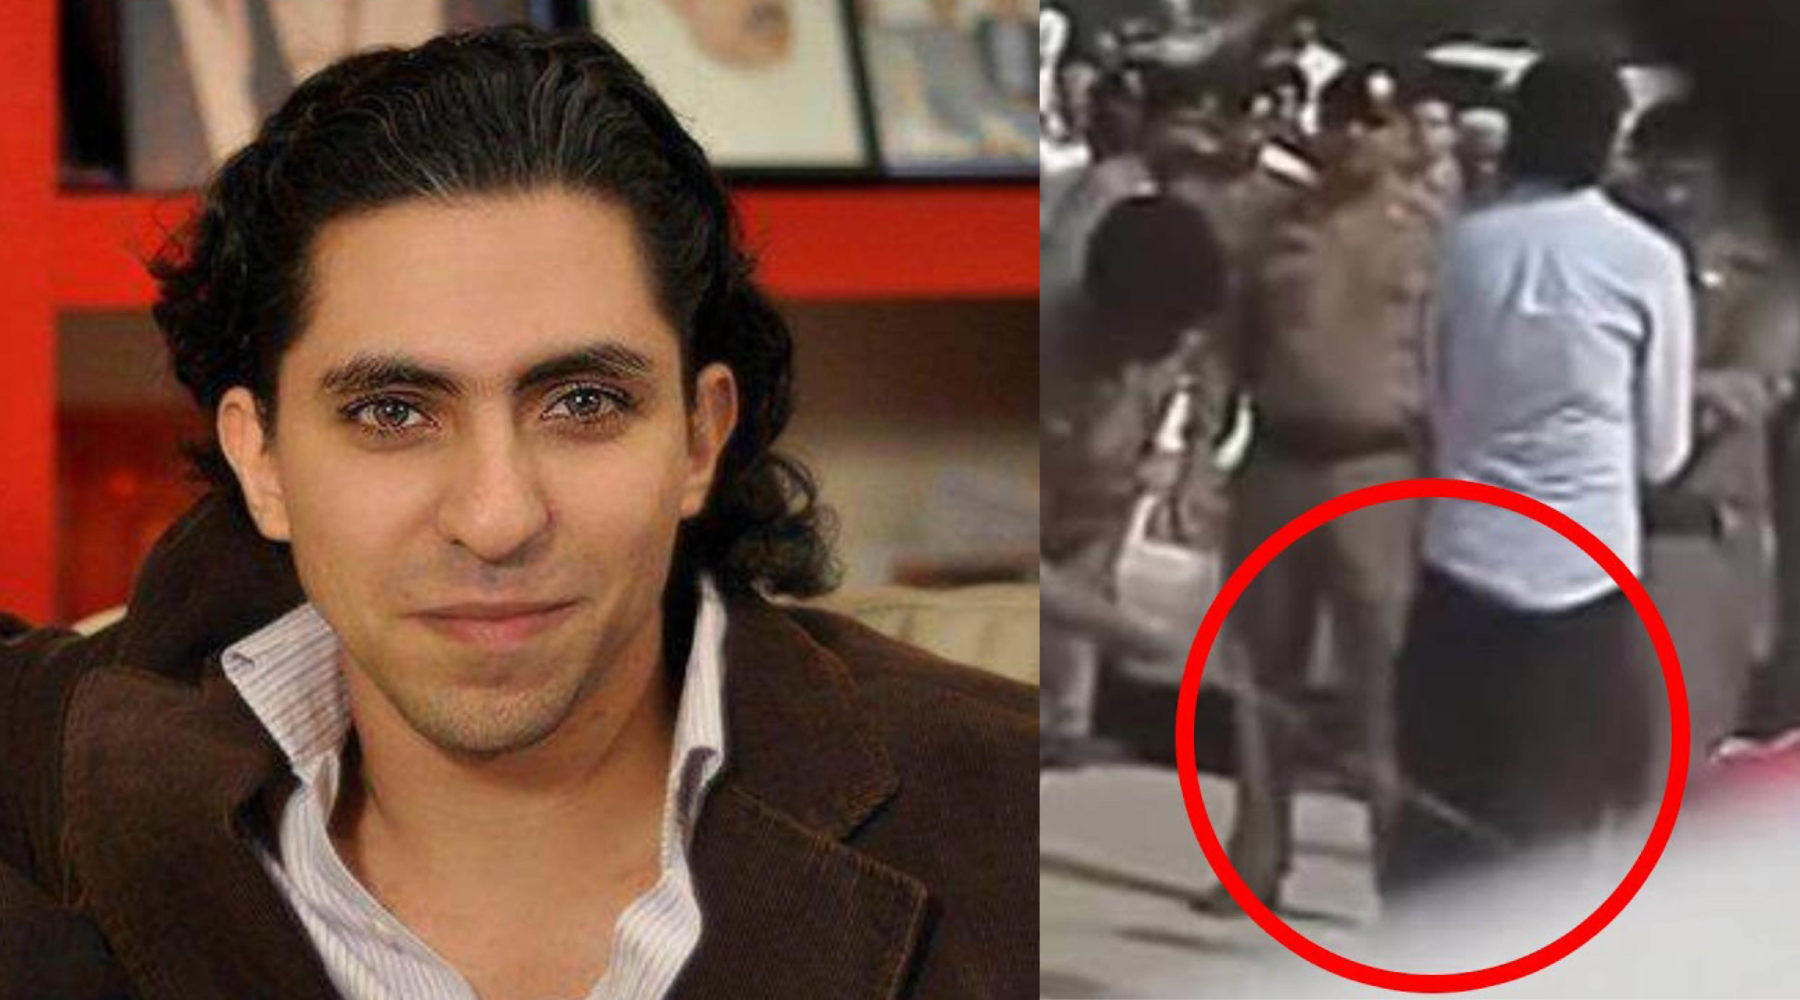 Raif Badawi in isolation, 5 years after his first 50 lashes
